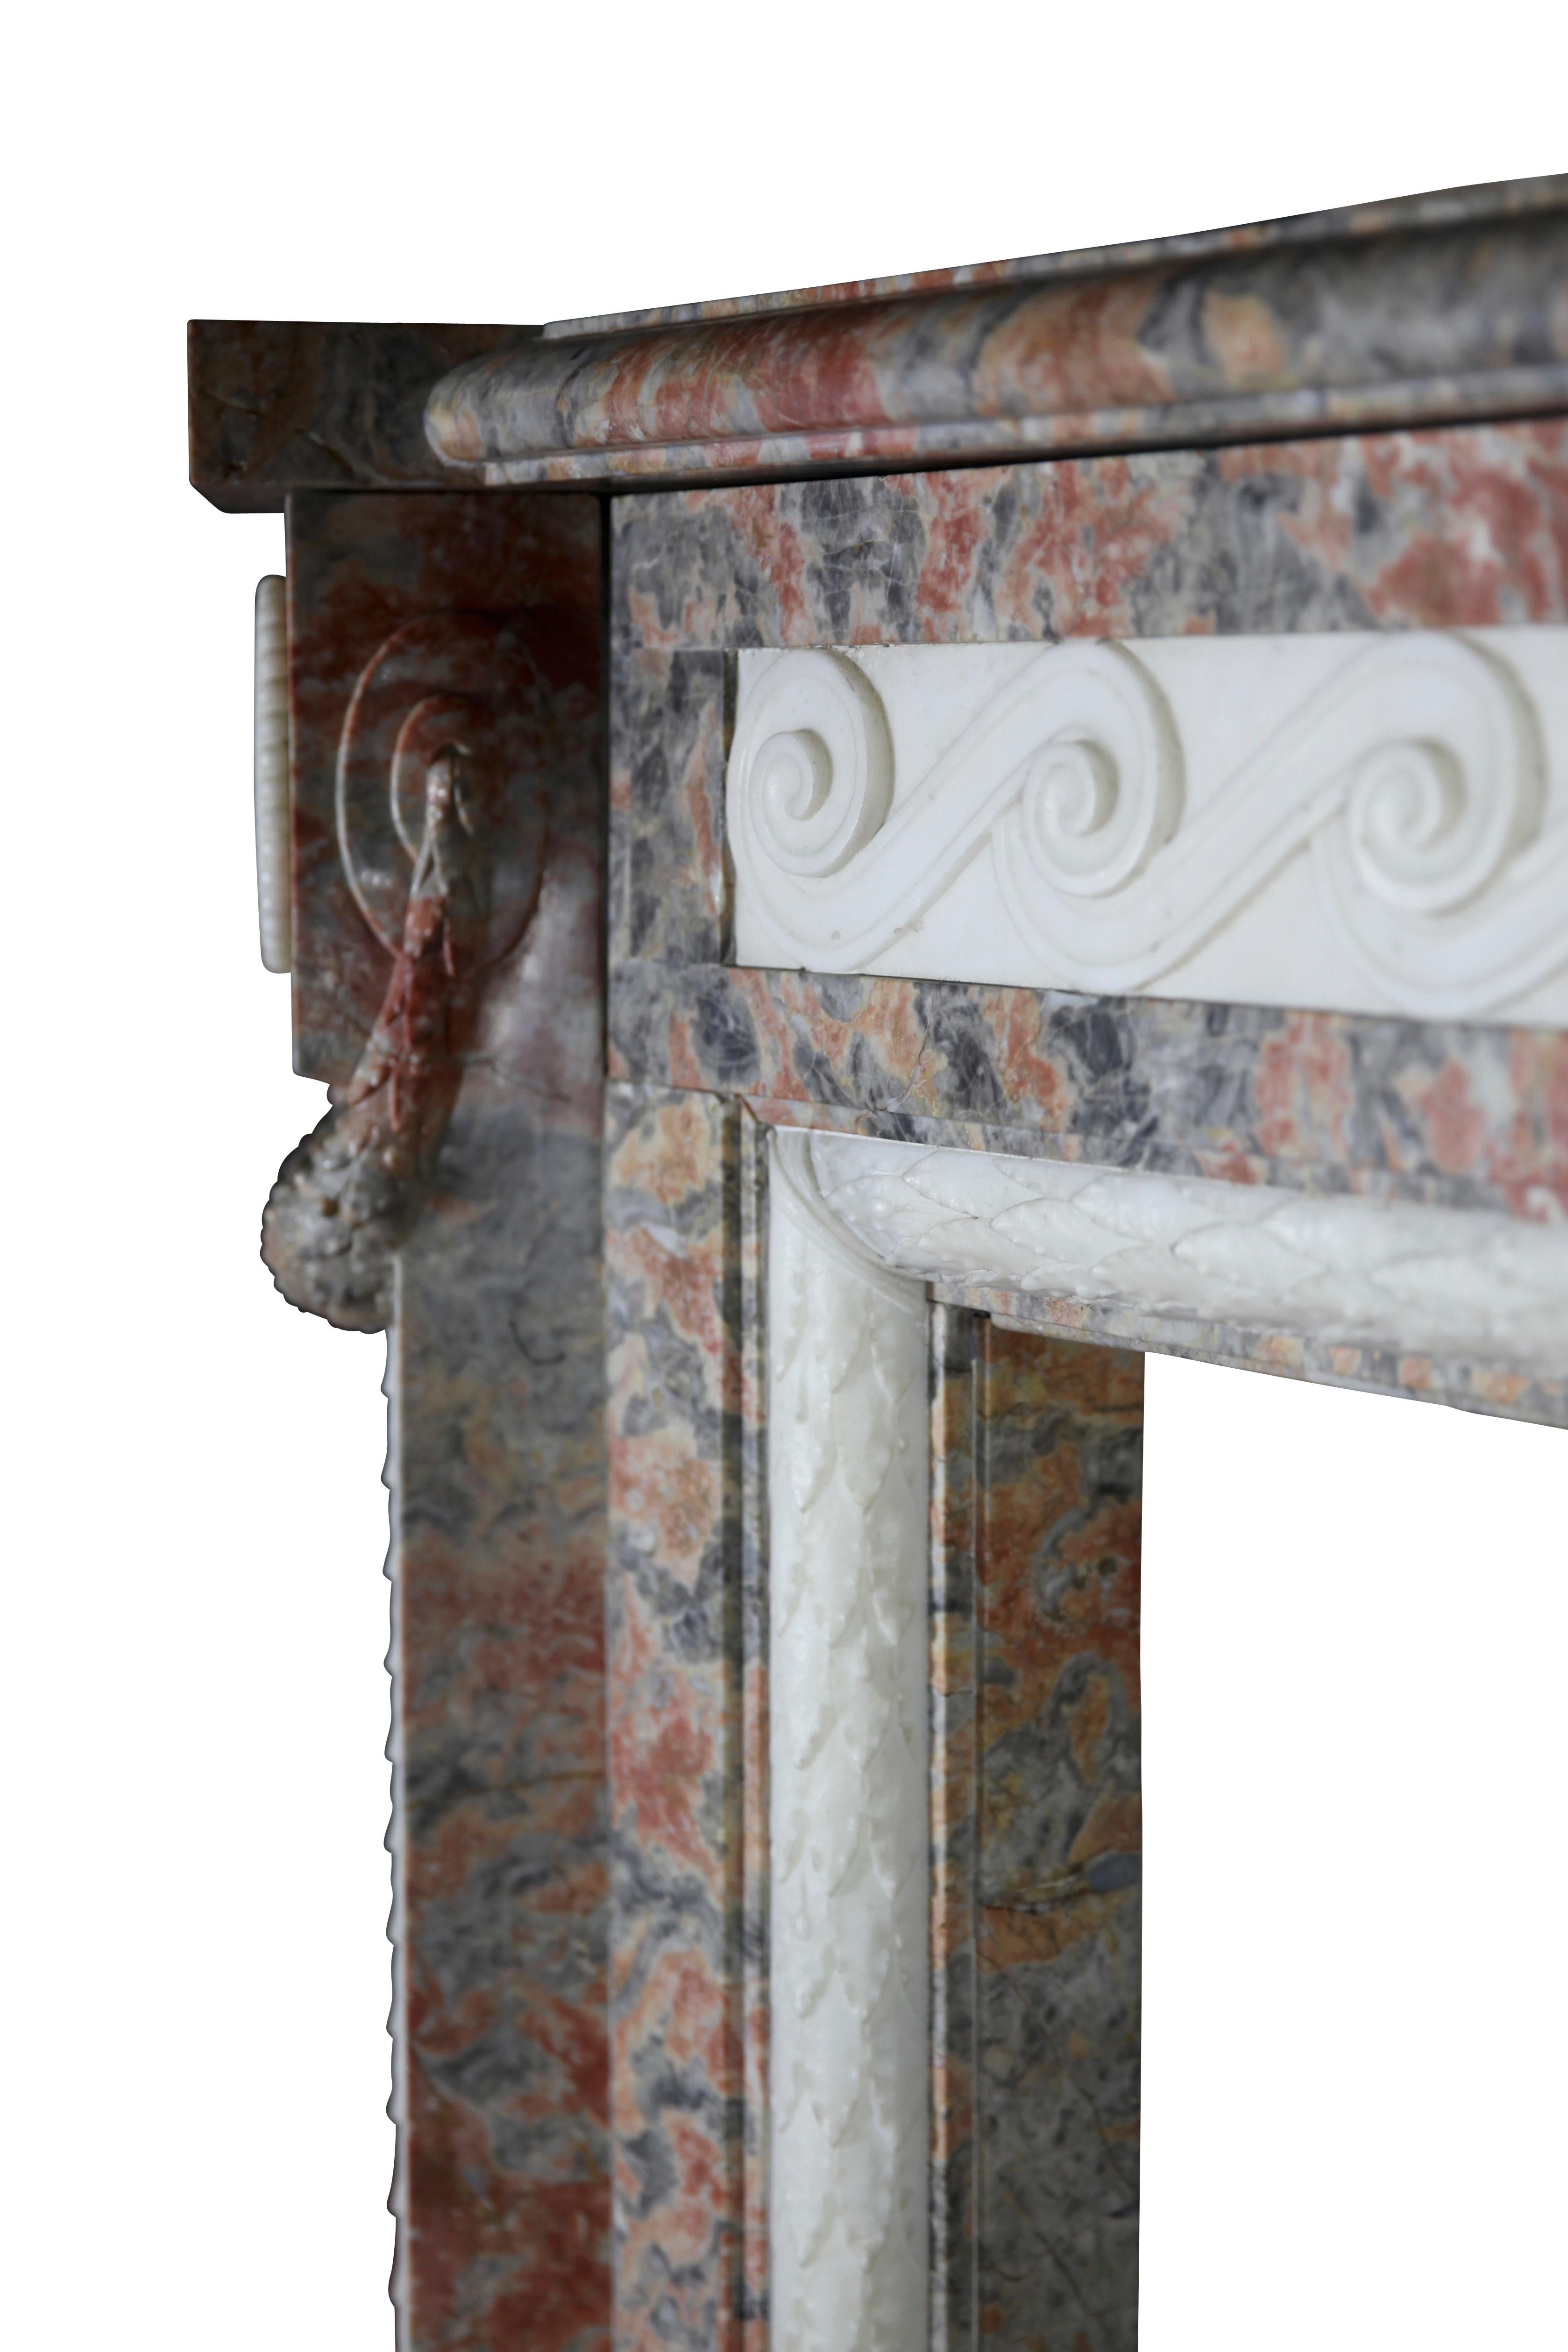 A state of the art original antique fireplace surround in Rouge Languedoc and white statuary marble inlay. It was built in a Louis XVI period palace. Reclaimed in Belgium. This chimney piece has exceptional proportions. 18th century.
Measures:
204